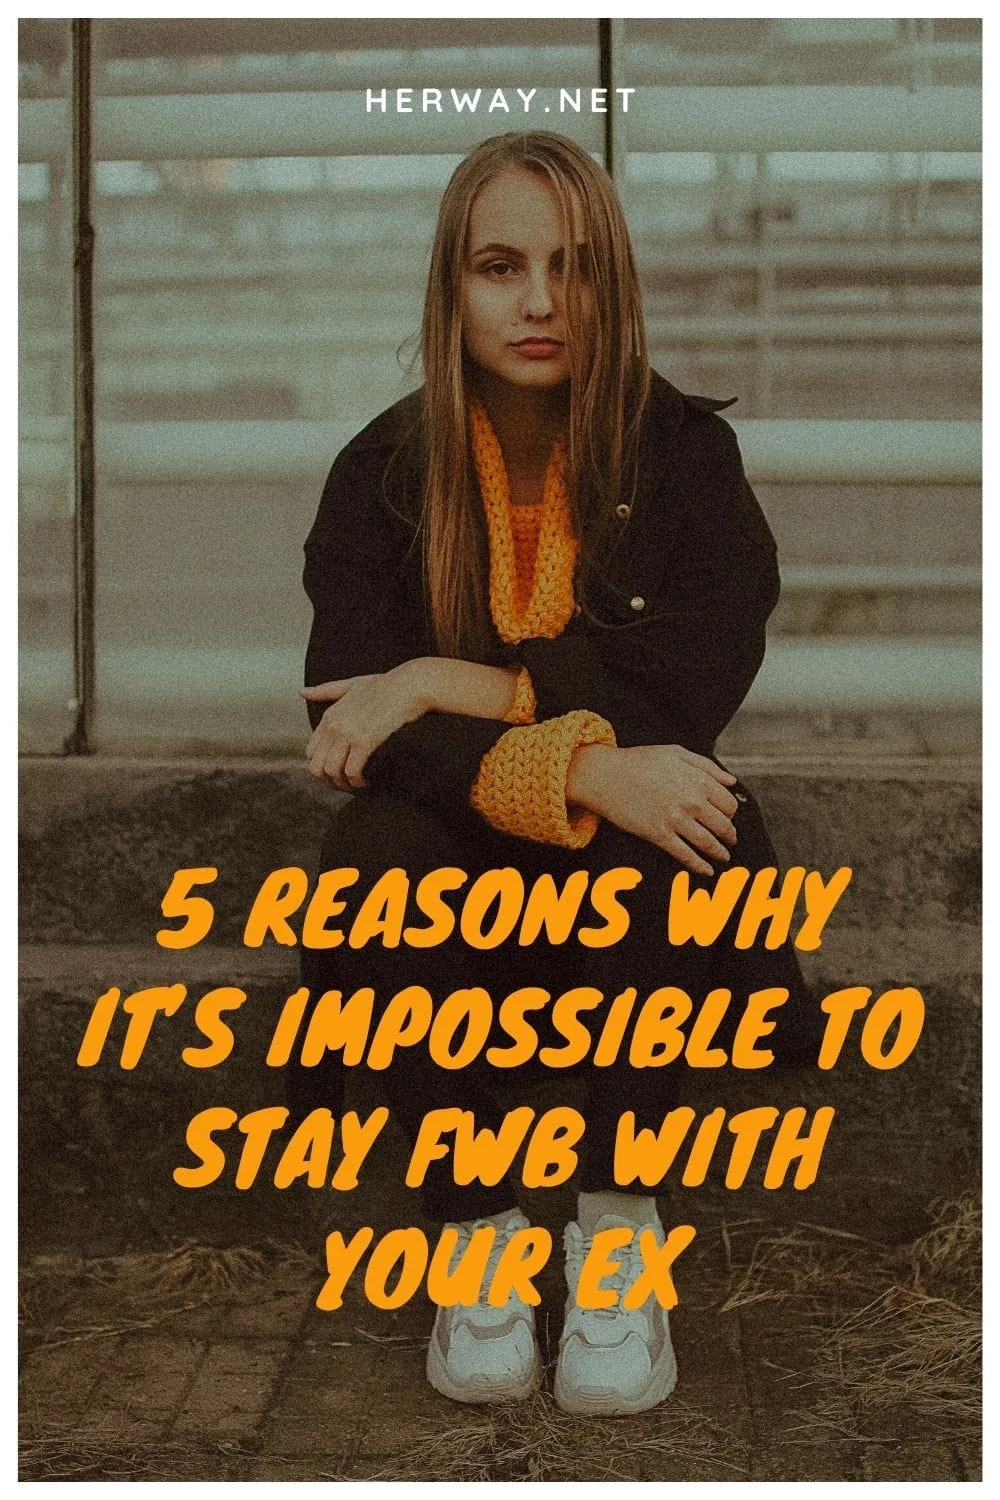 5 Reasons Why It’s Impossible To Stay FWB With Your EX